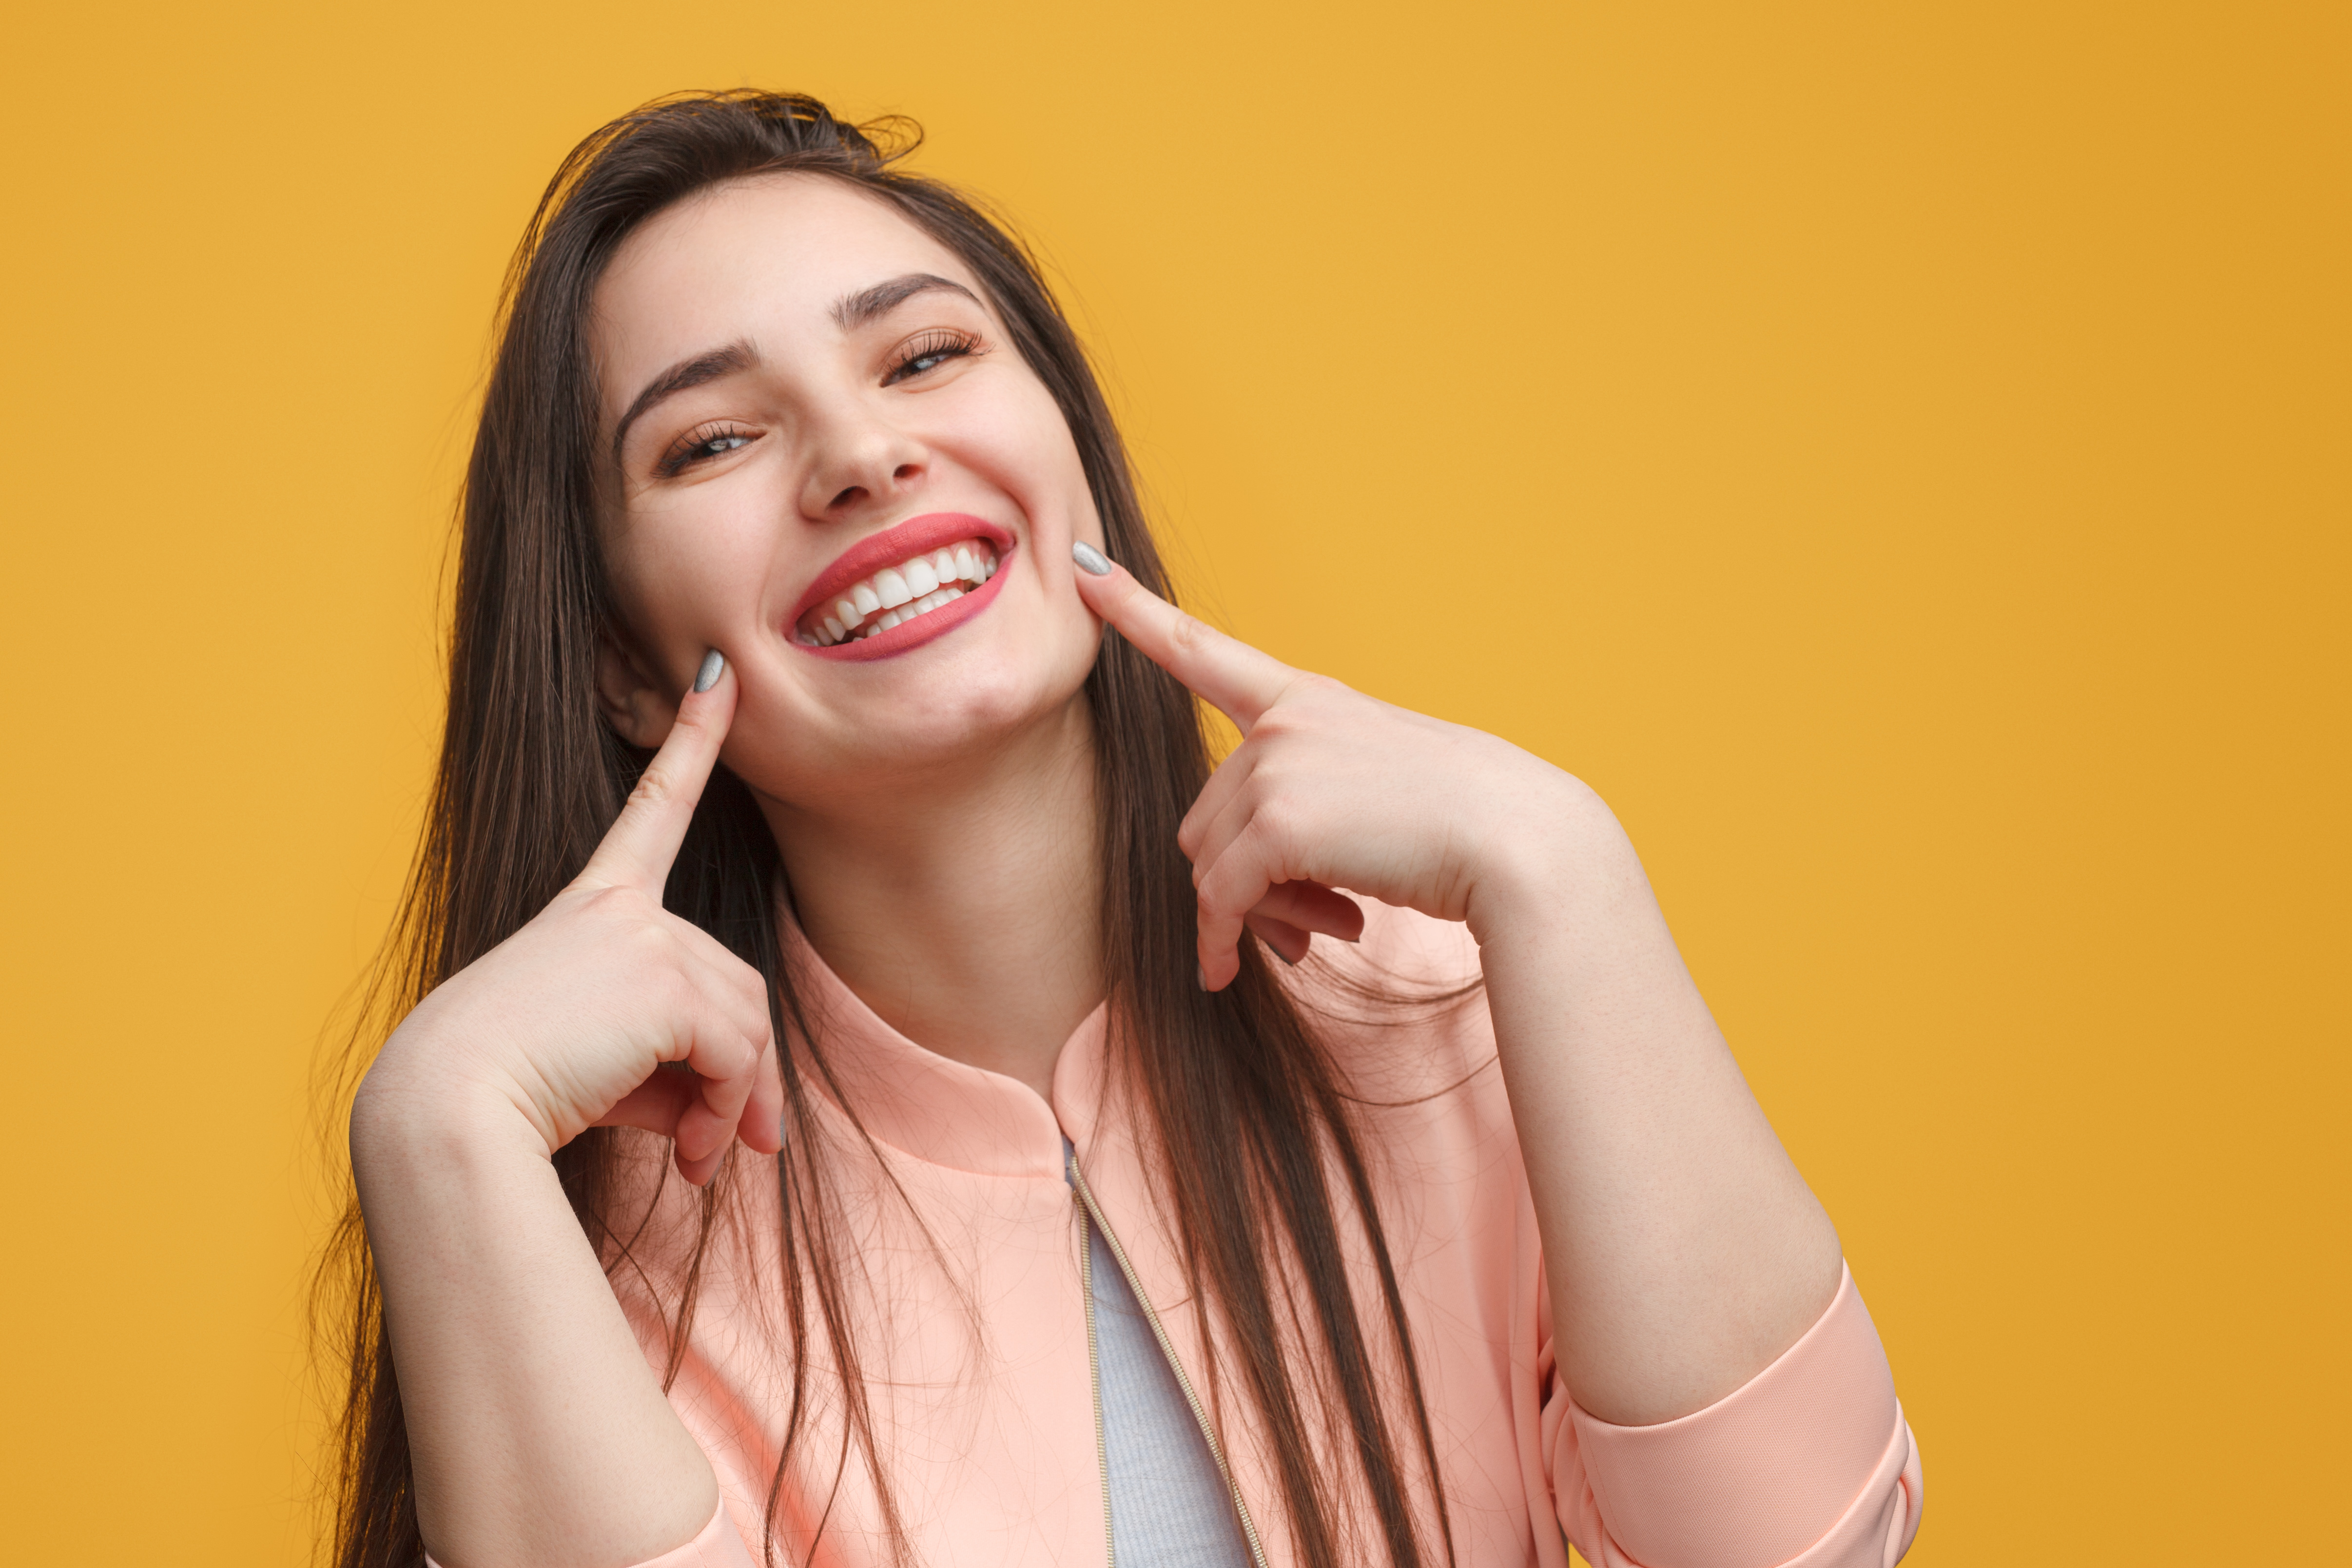 Gum Surgery can Give you a Better Smile